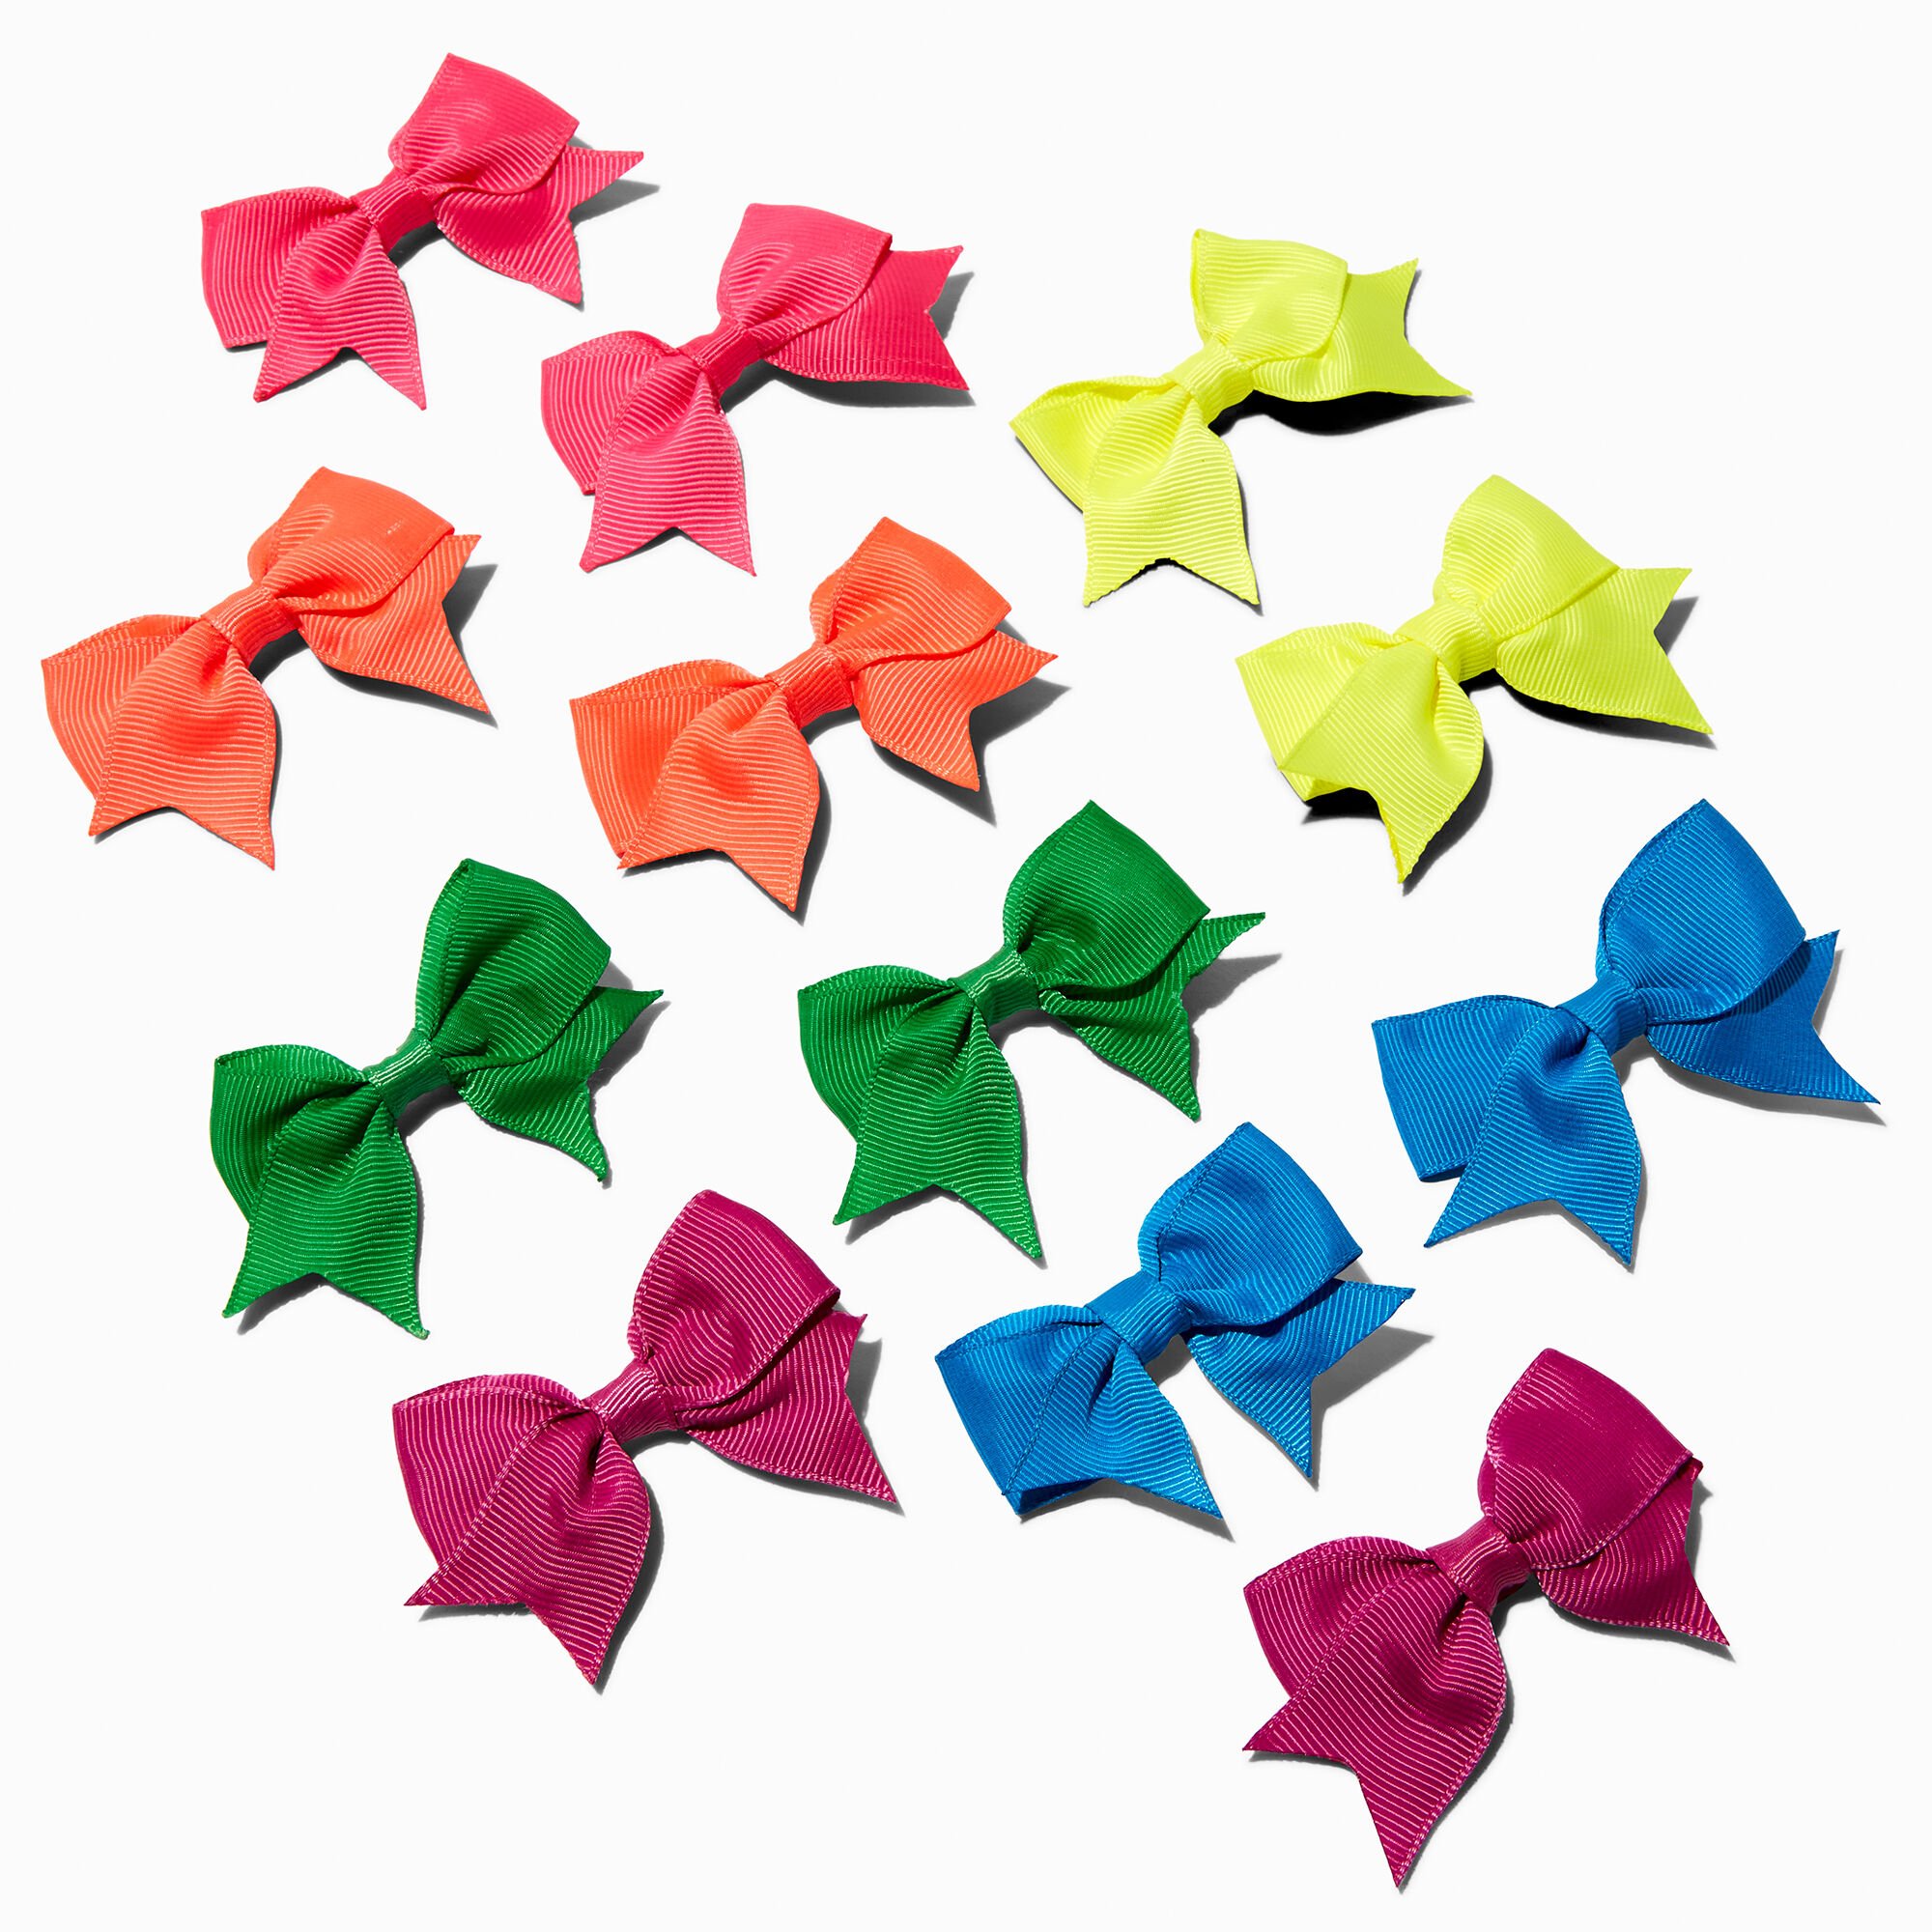 View Claires Club Neon Mini Hair Bow Clips 12 Pack information